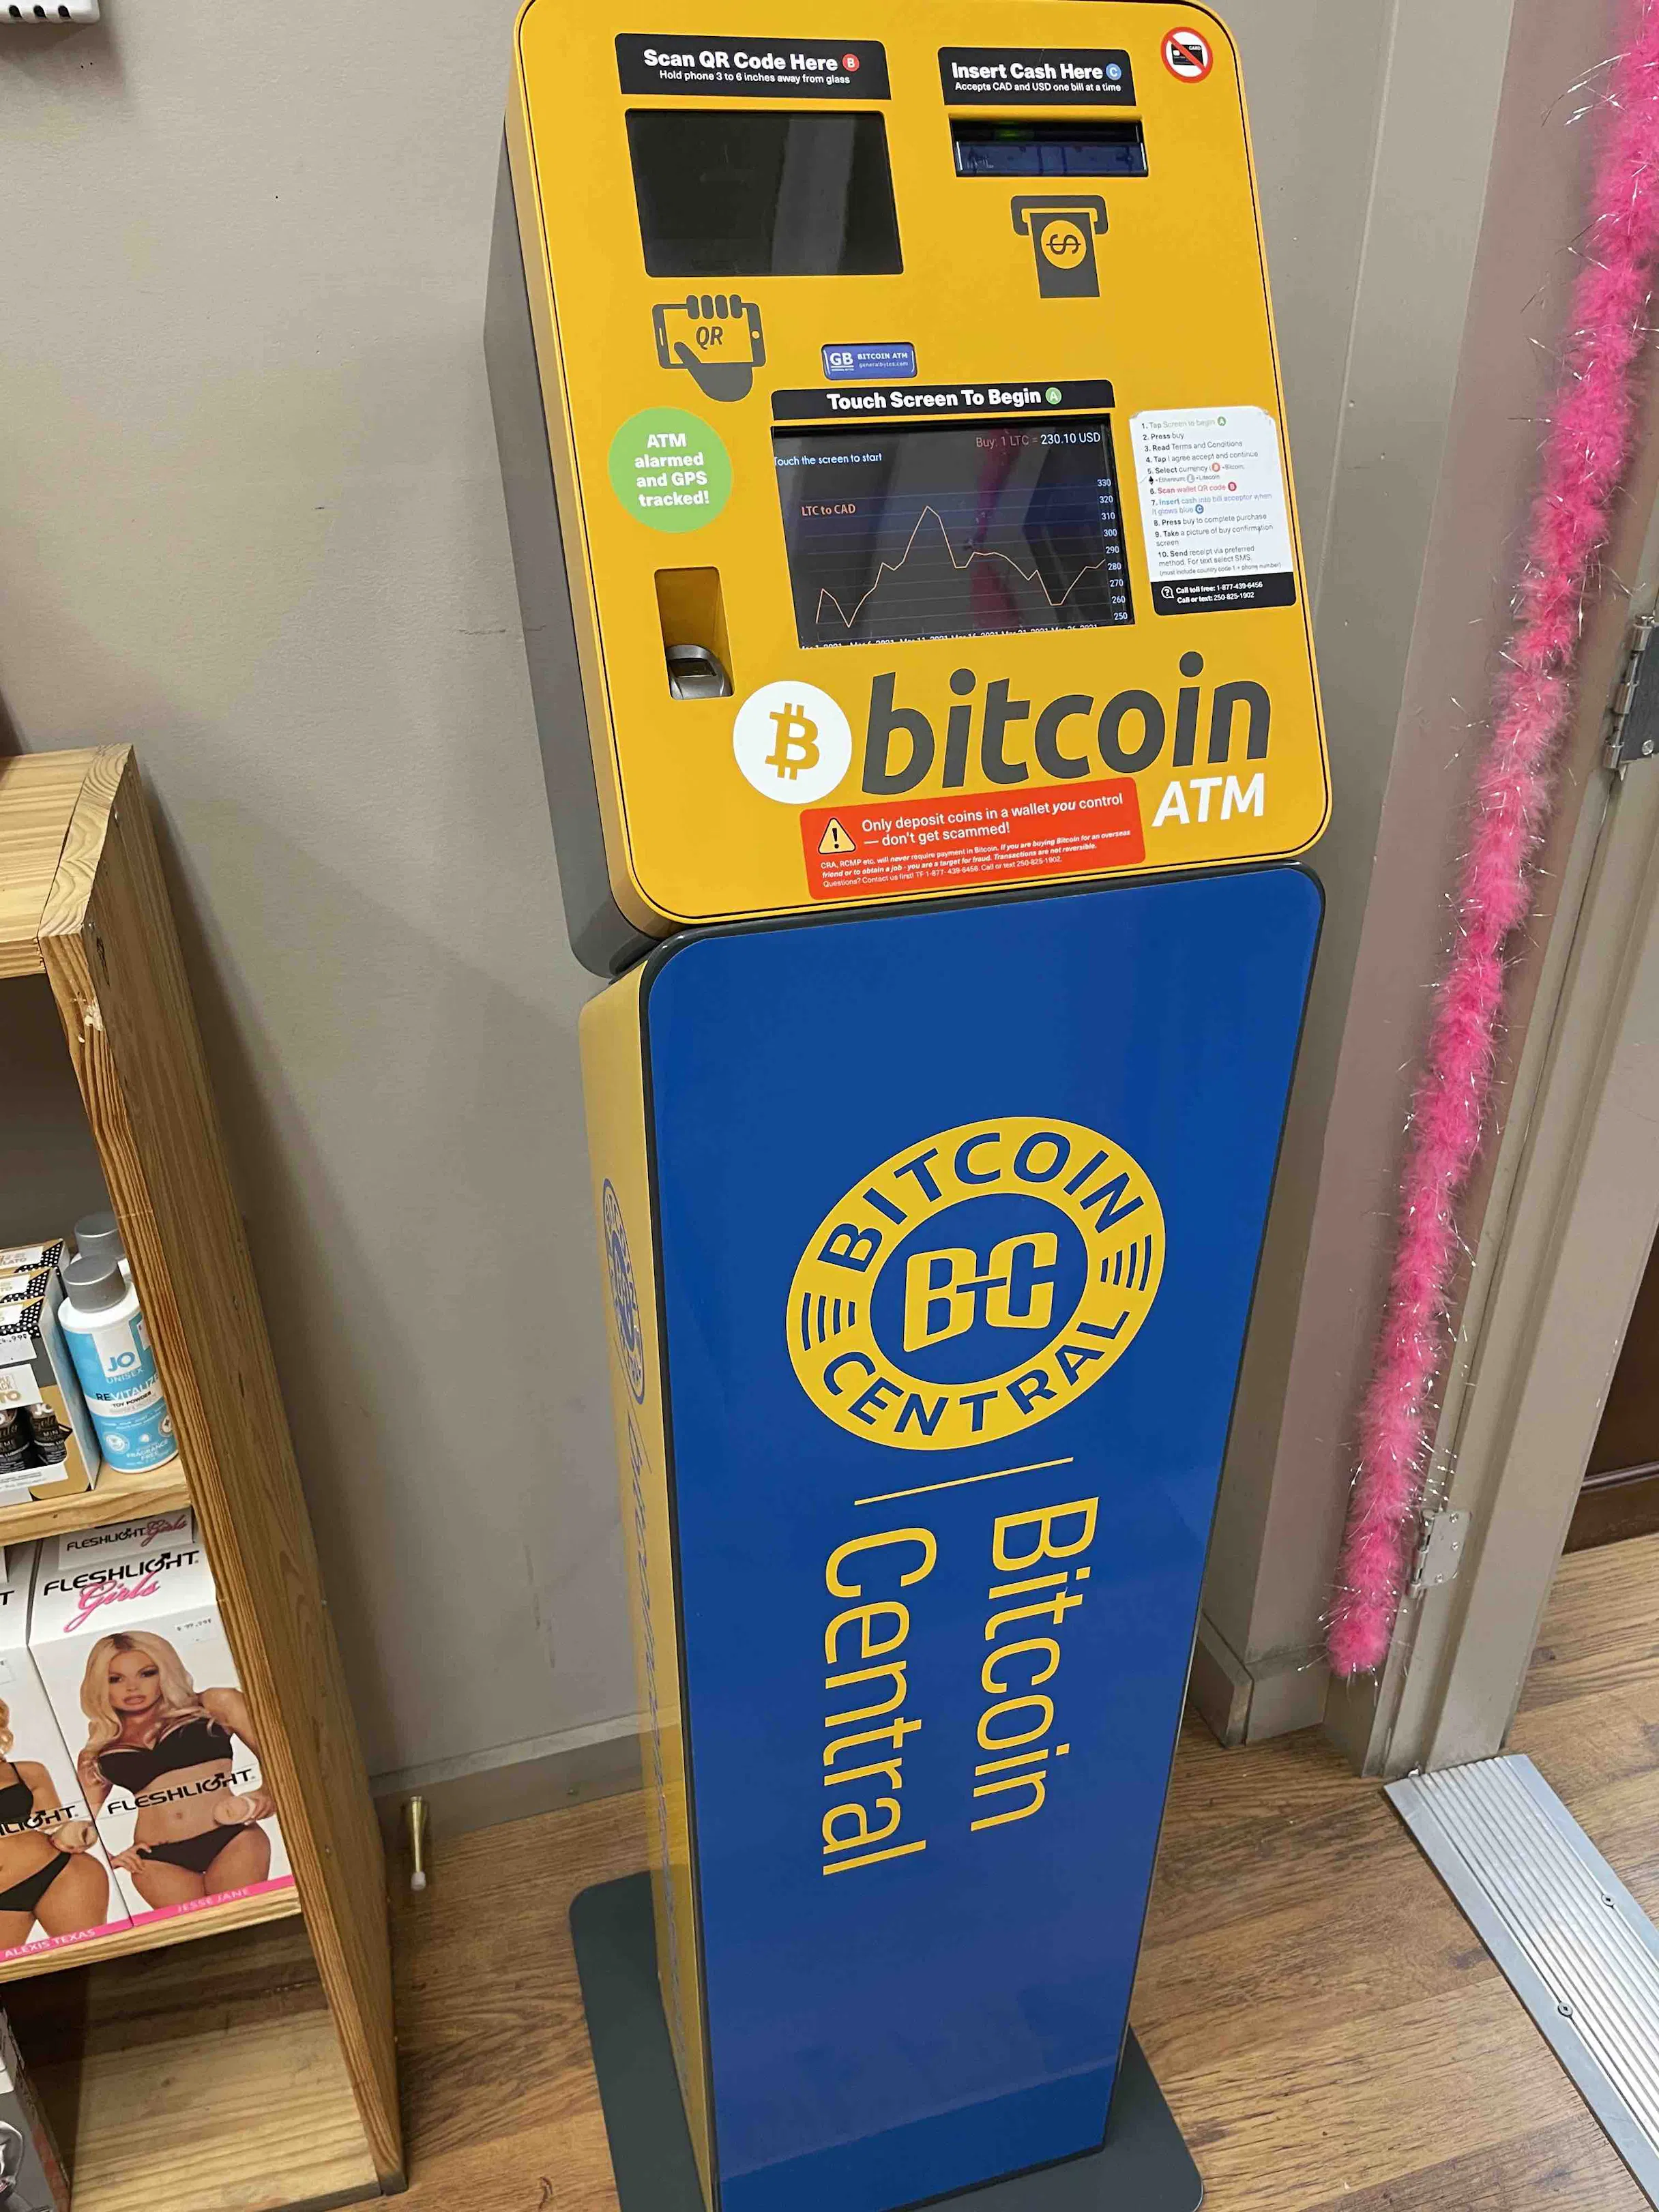 Bitcoin Central ATM Machine is The Lemonade Stand located at 2013 Quilchena Ave Merritt BC V1K 1B8